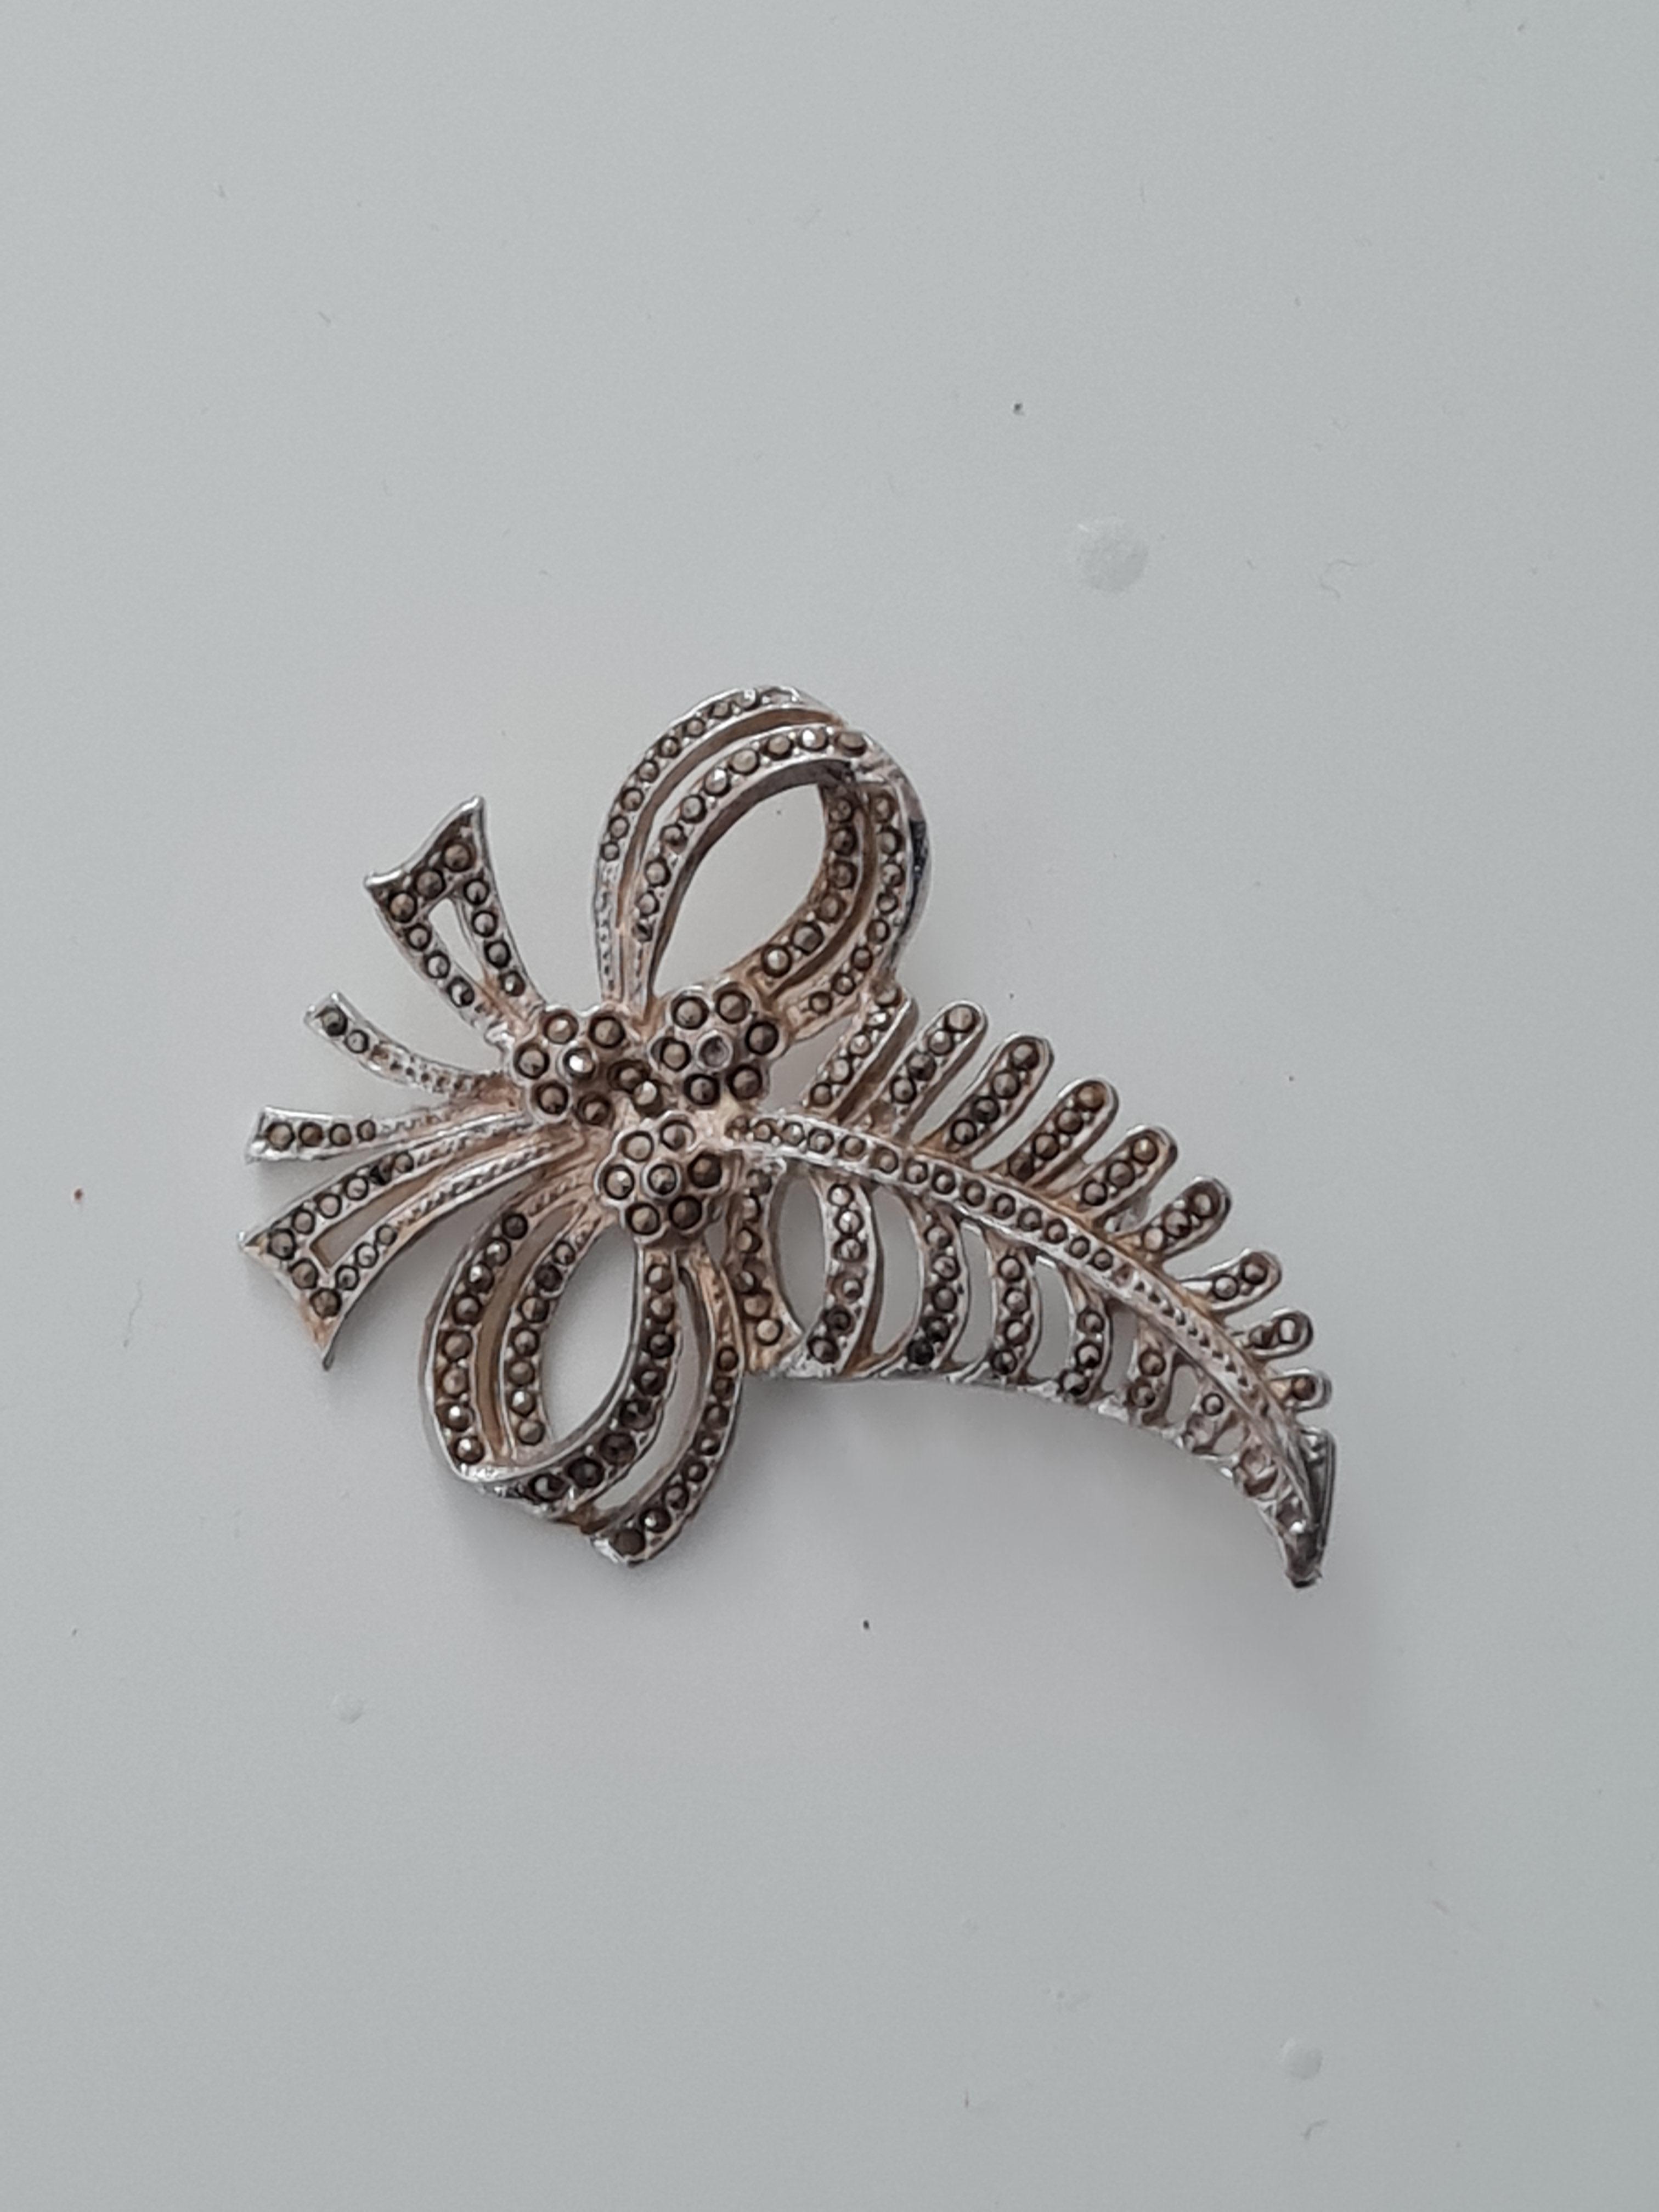 Vintage Silvertone Feather Marcasite Brooch - Image 4 of 5